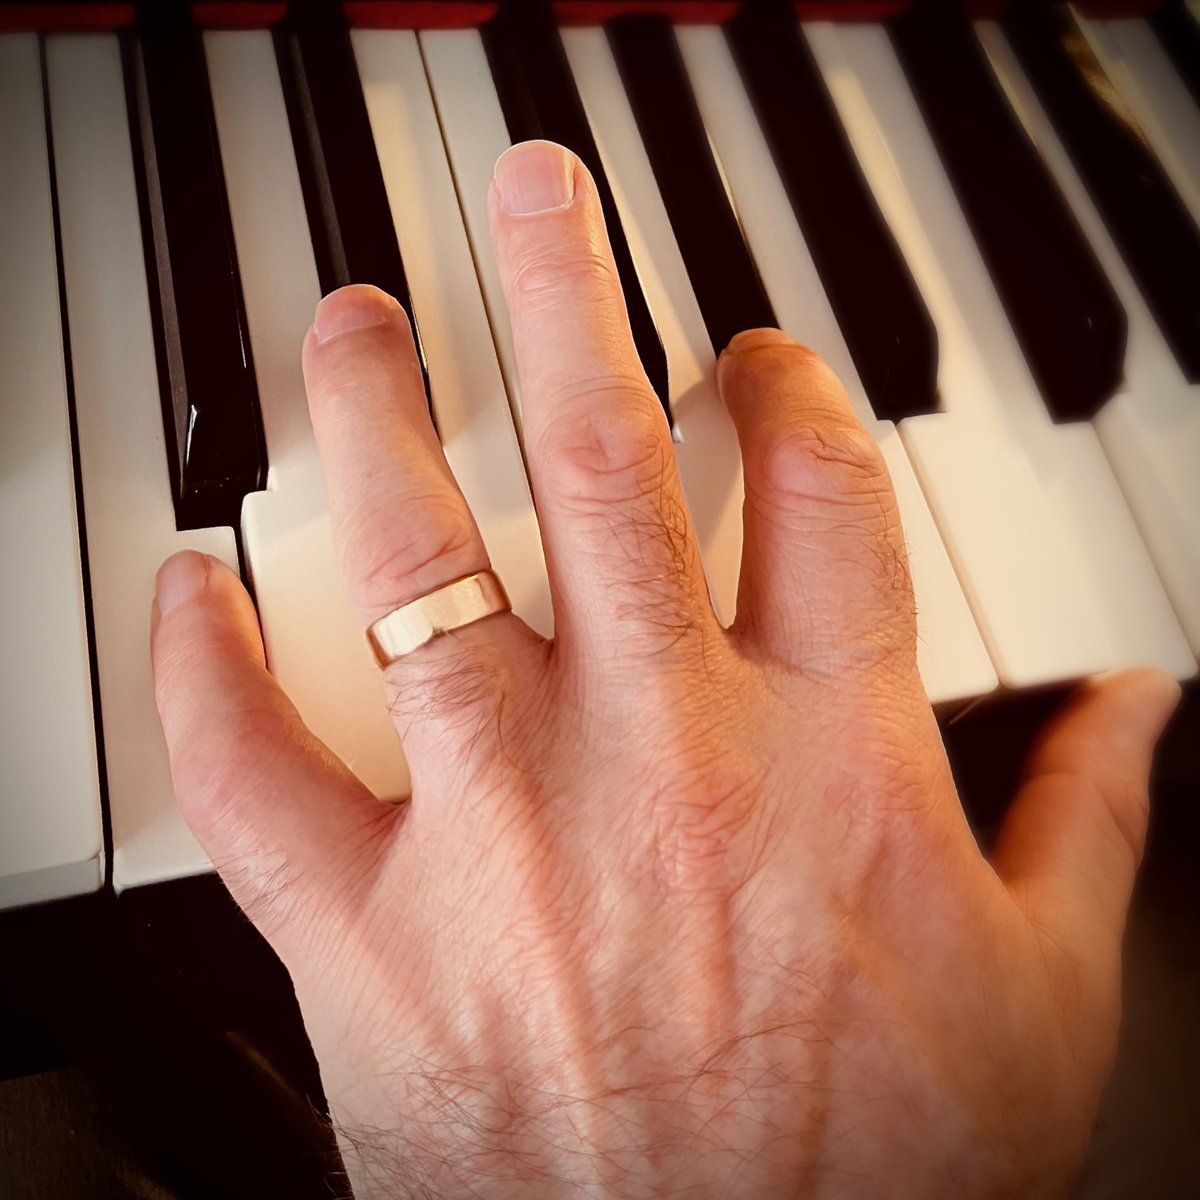 After dislocating my little finger last month I'm finally back to playing the piano (somewhat tentatively). Still experiencing some soreness and swelling but after weeks of strapping and physiotherapy progress is good. 👍